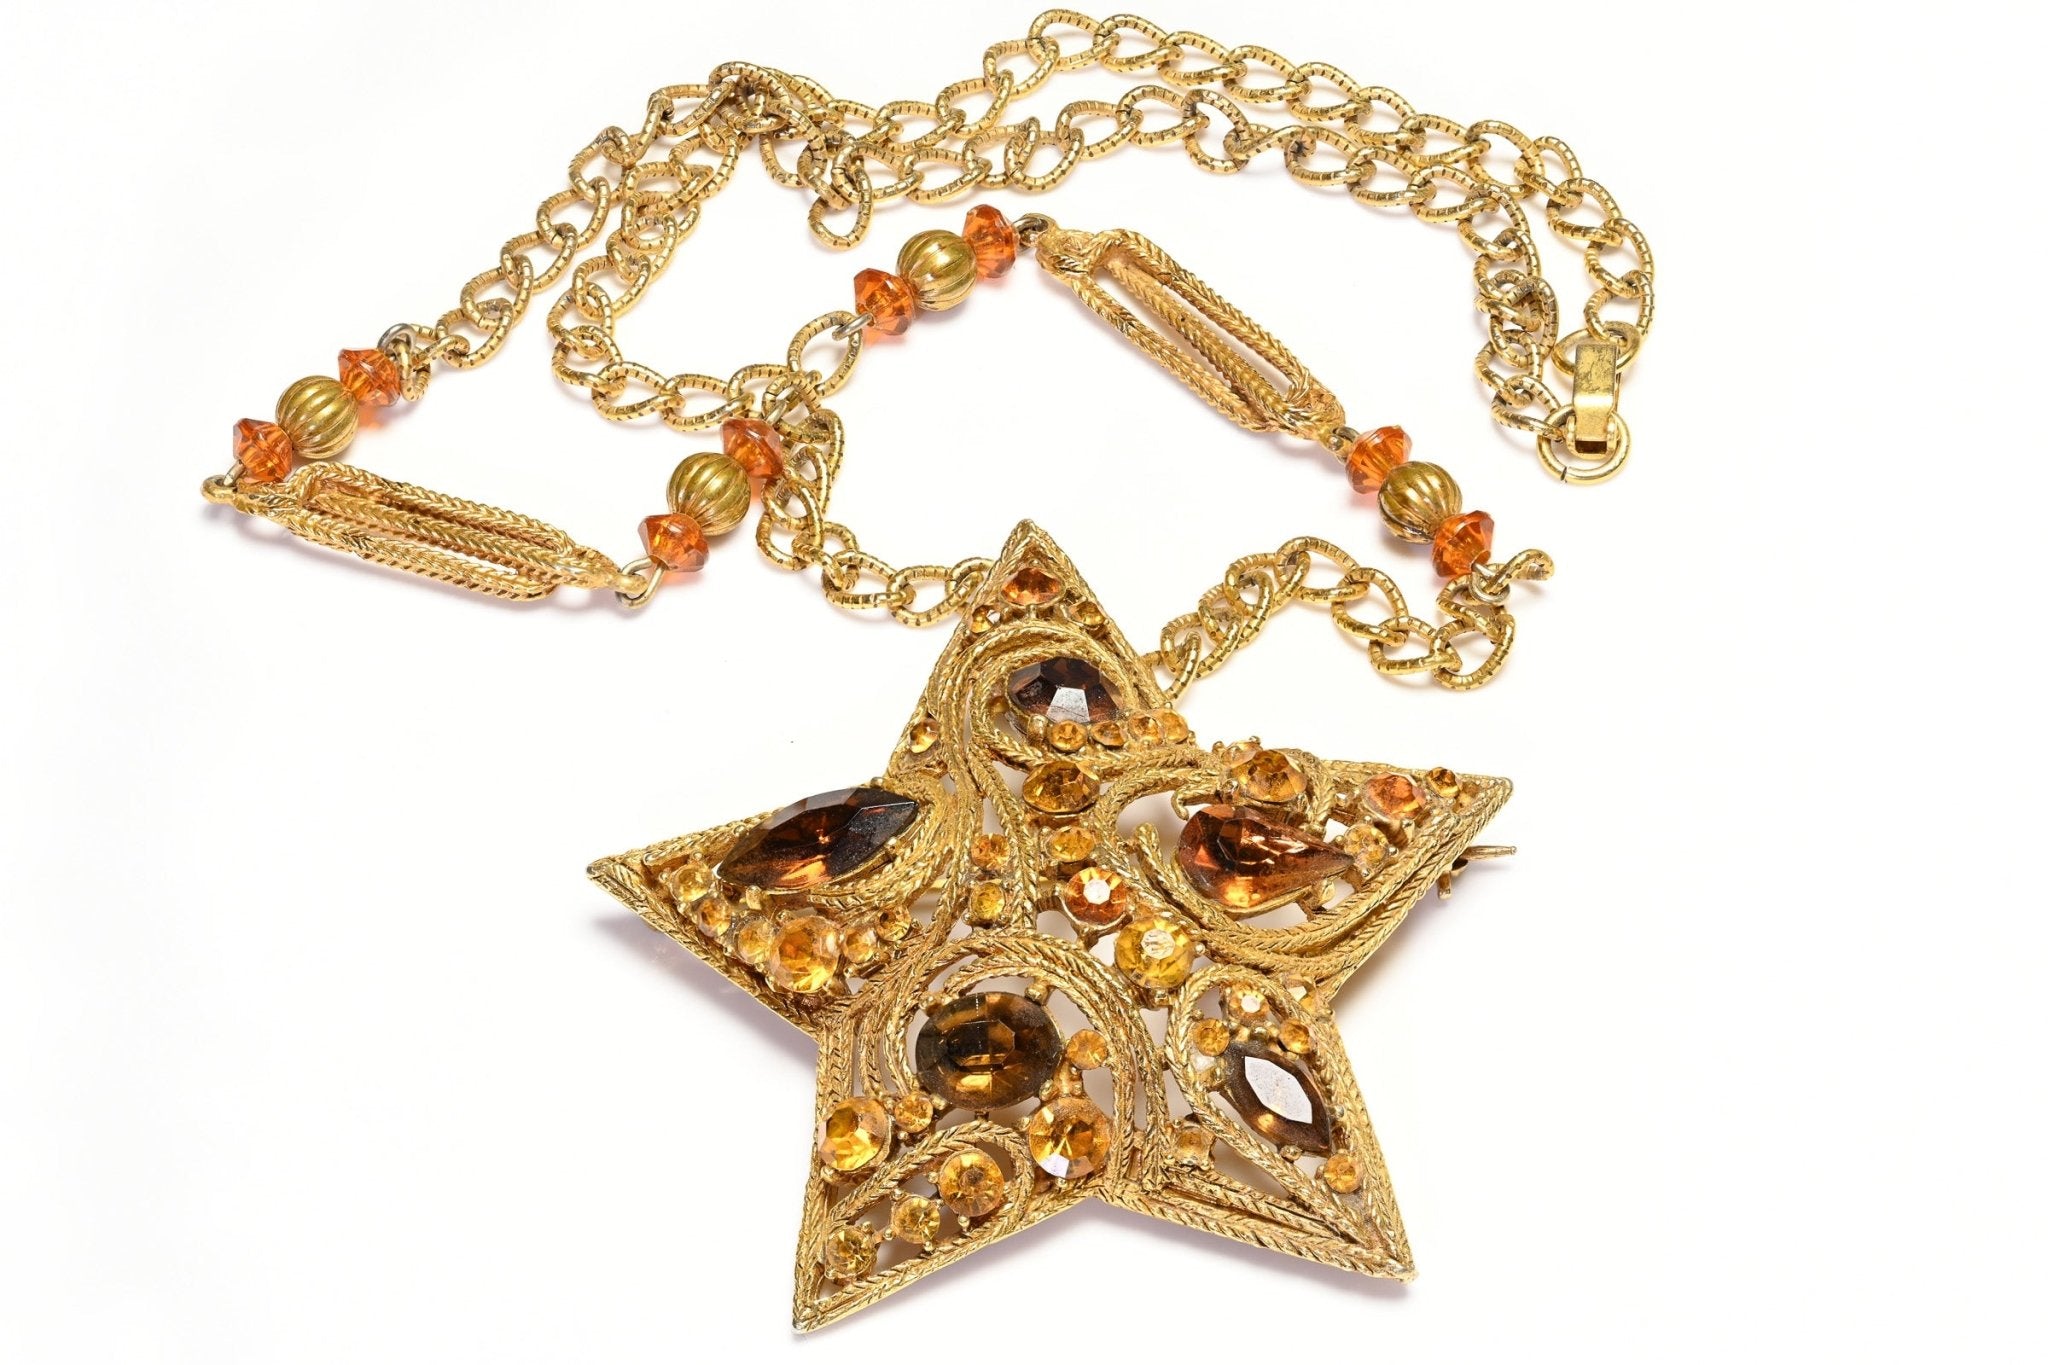 Vintage 1950's Brown Crystal Star Chain Brooch Necklace